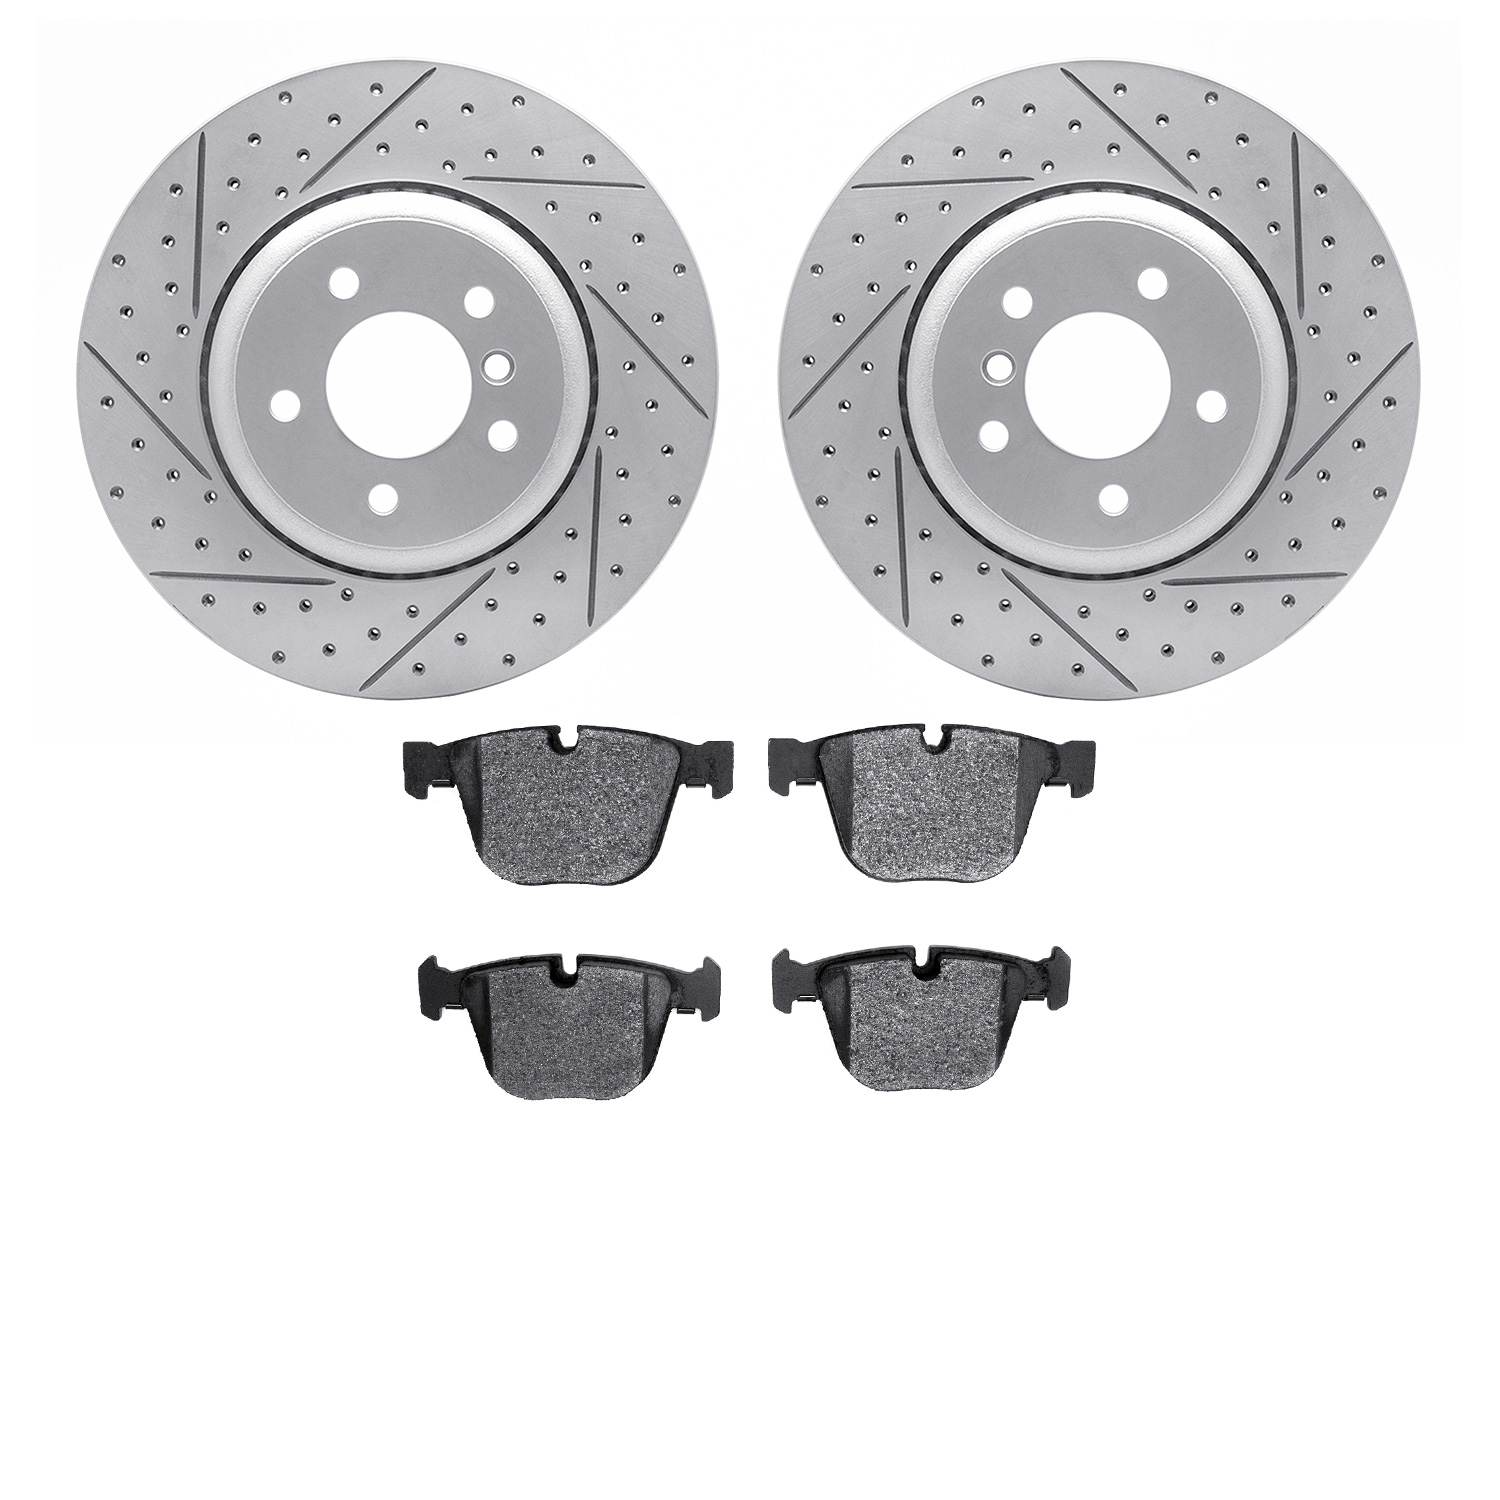 2502-31047 Geoperformance Drilled/Slotted Rotors w/5000 Advanced Brake Pads Kit, 2004-2010 BMW, Position: Rear